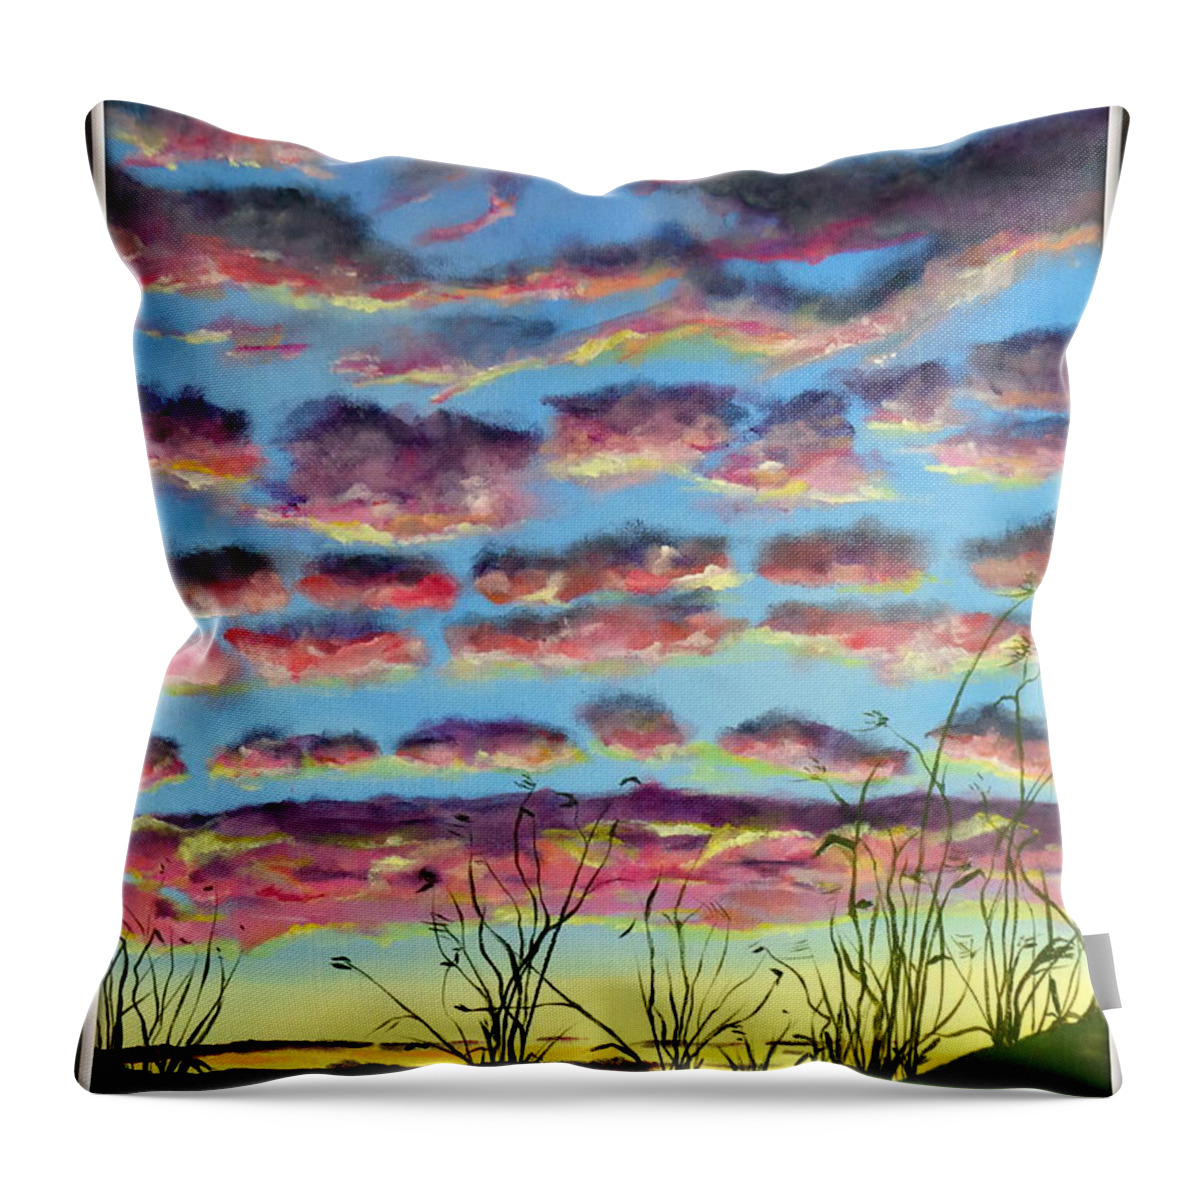 Clouds At Sunset Painting Throw Pillow featuring the painting Clouds at Sunset by Deborah Naves